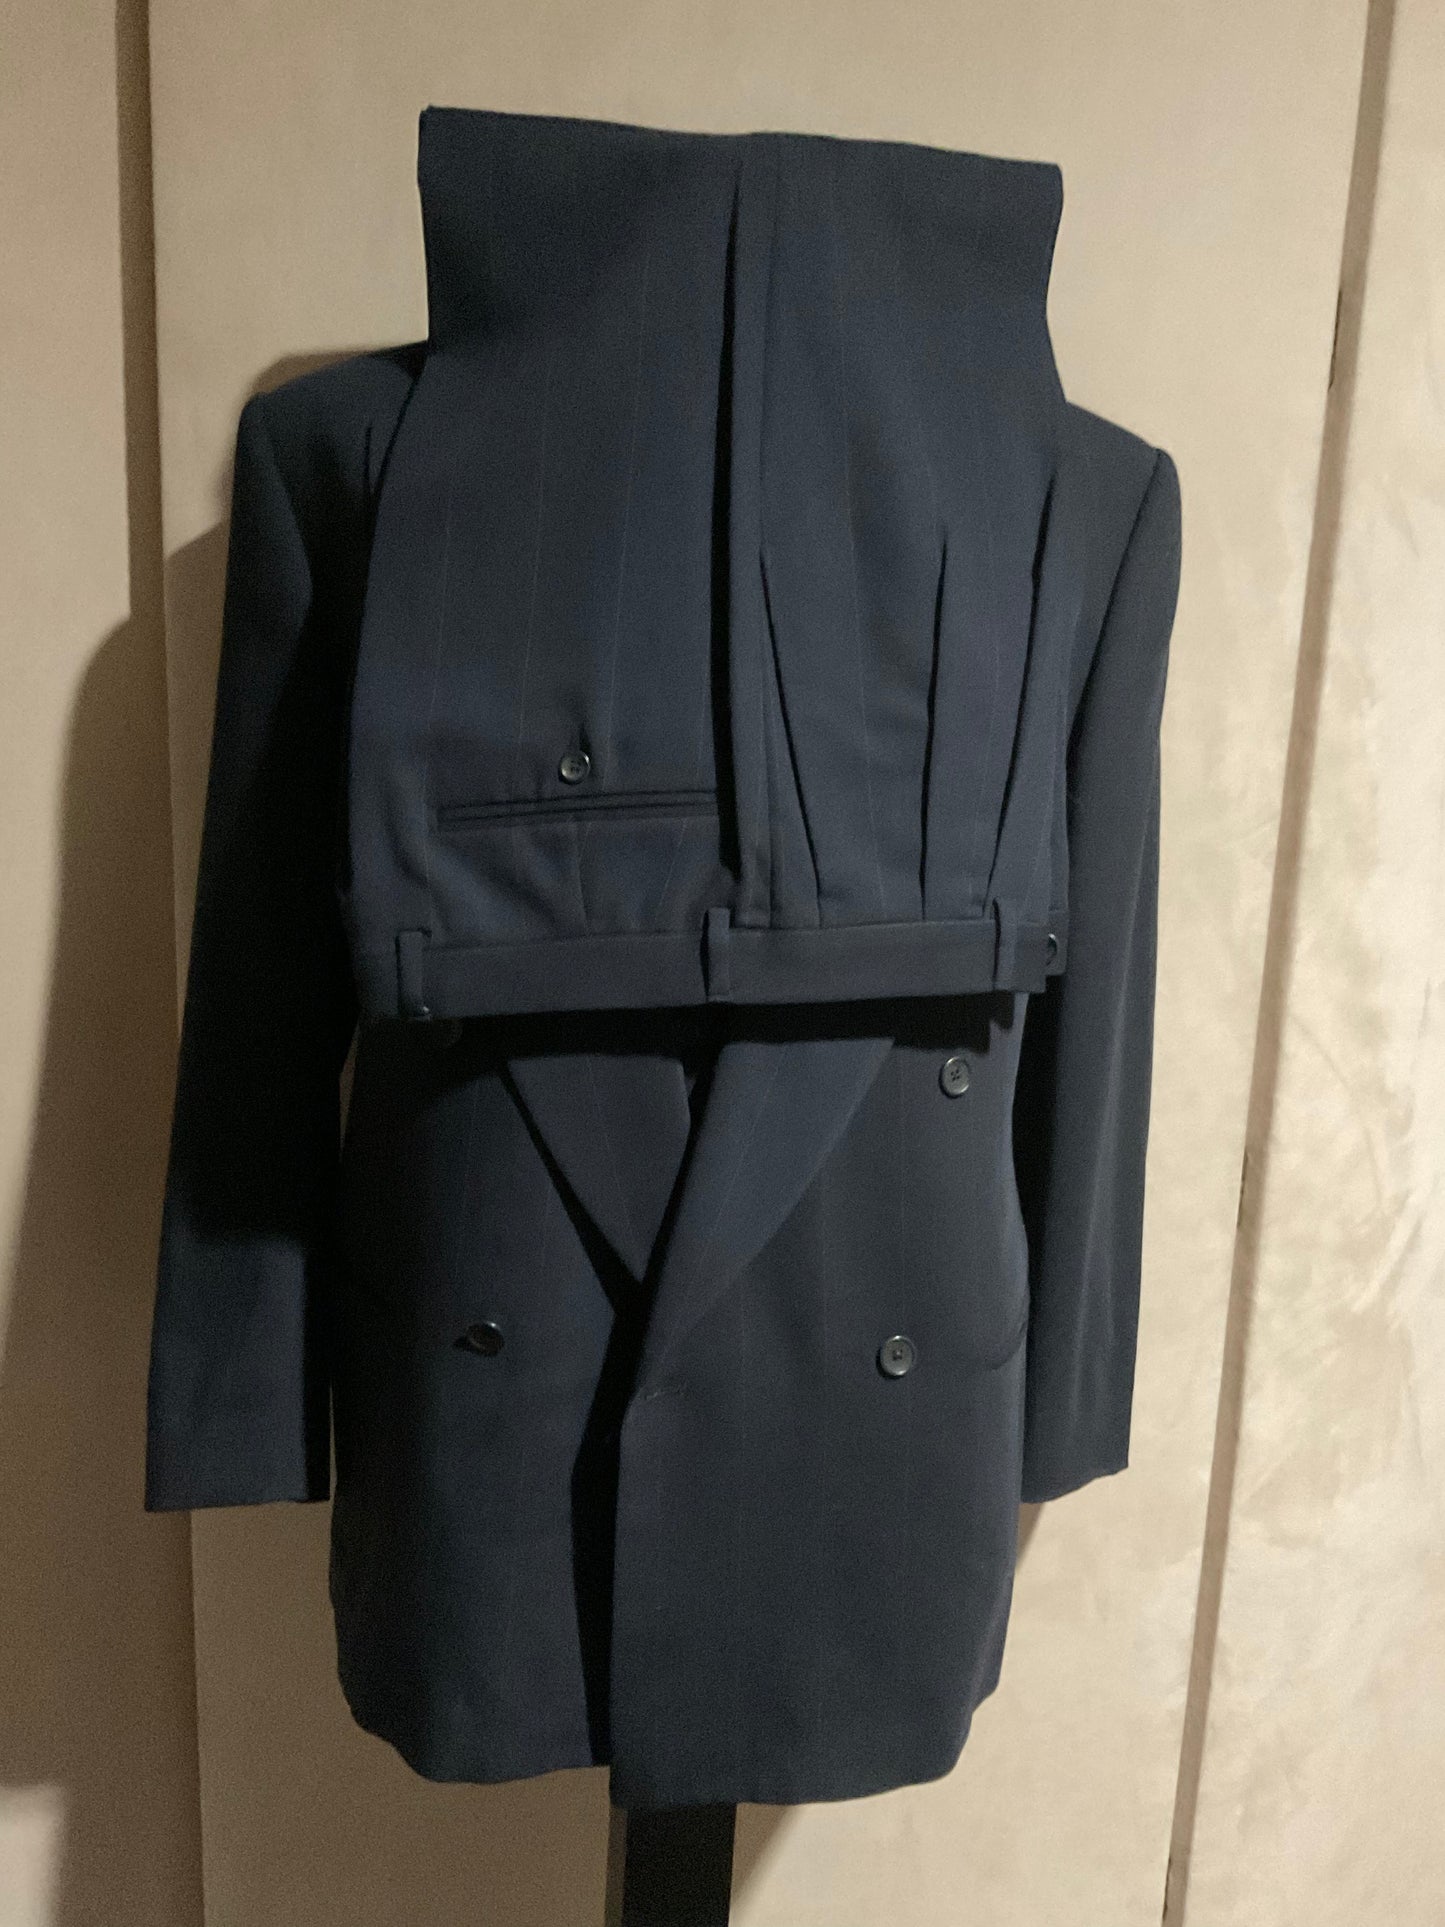 R P SUIT & VEST / DOUBLE BREASTED / NAVY STRIPE / 40 REG / MADE IN ITALY